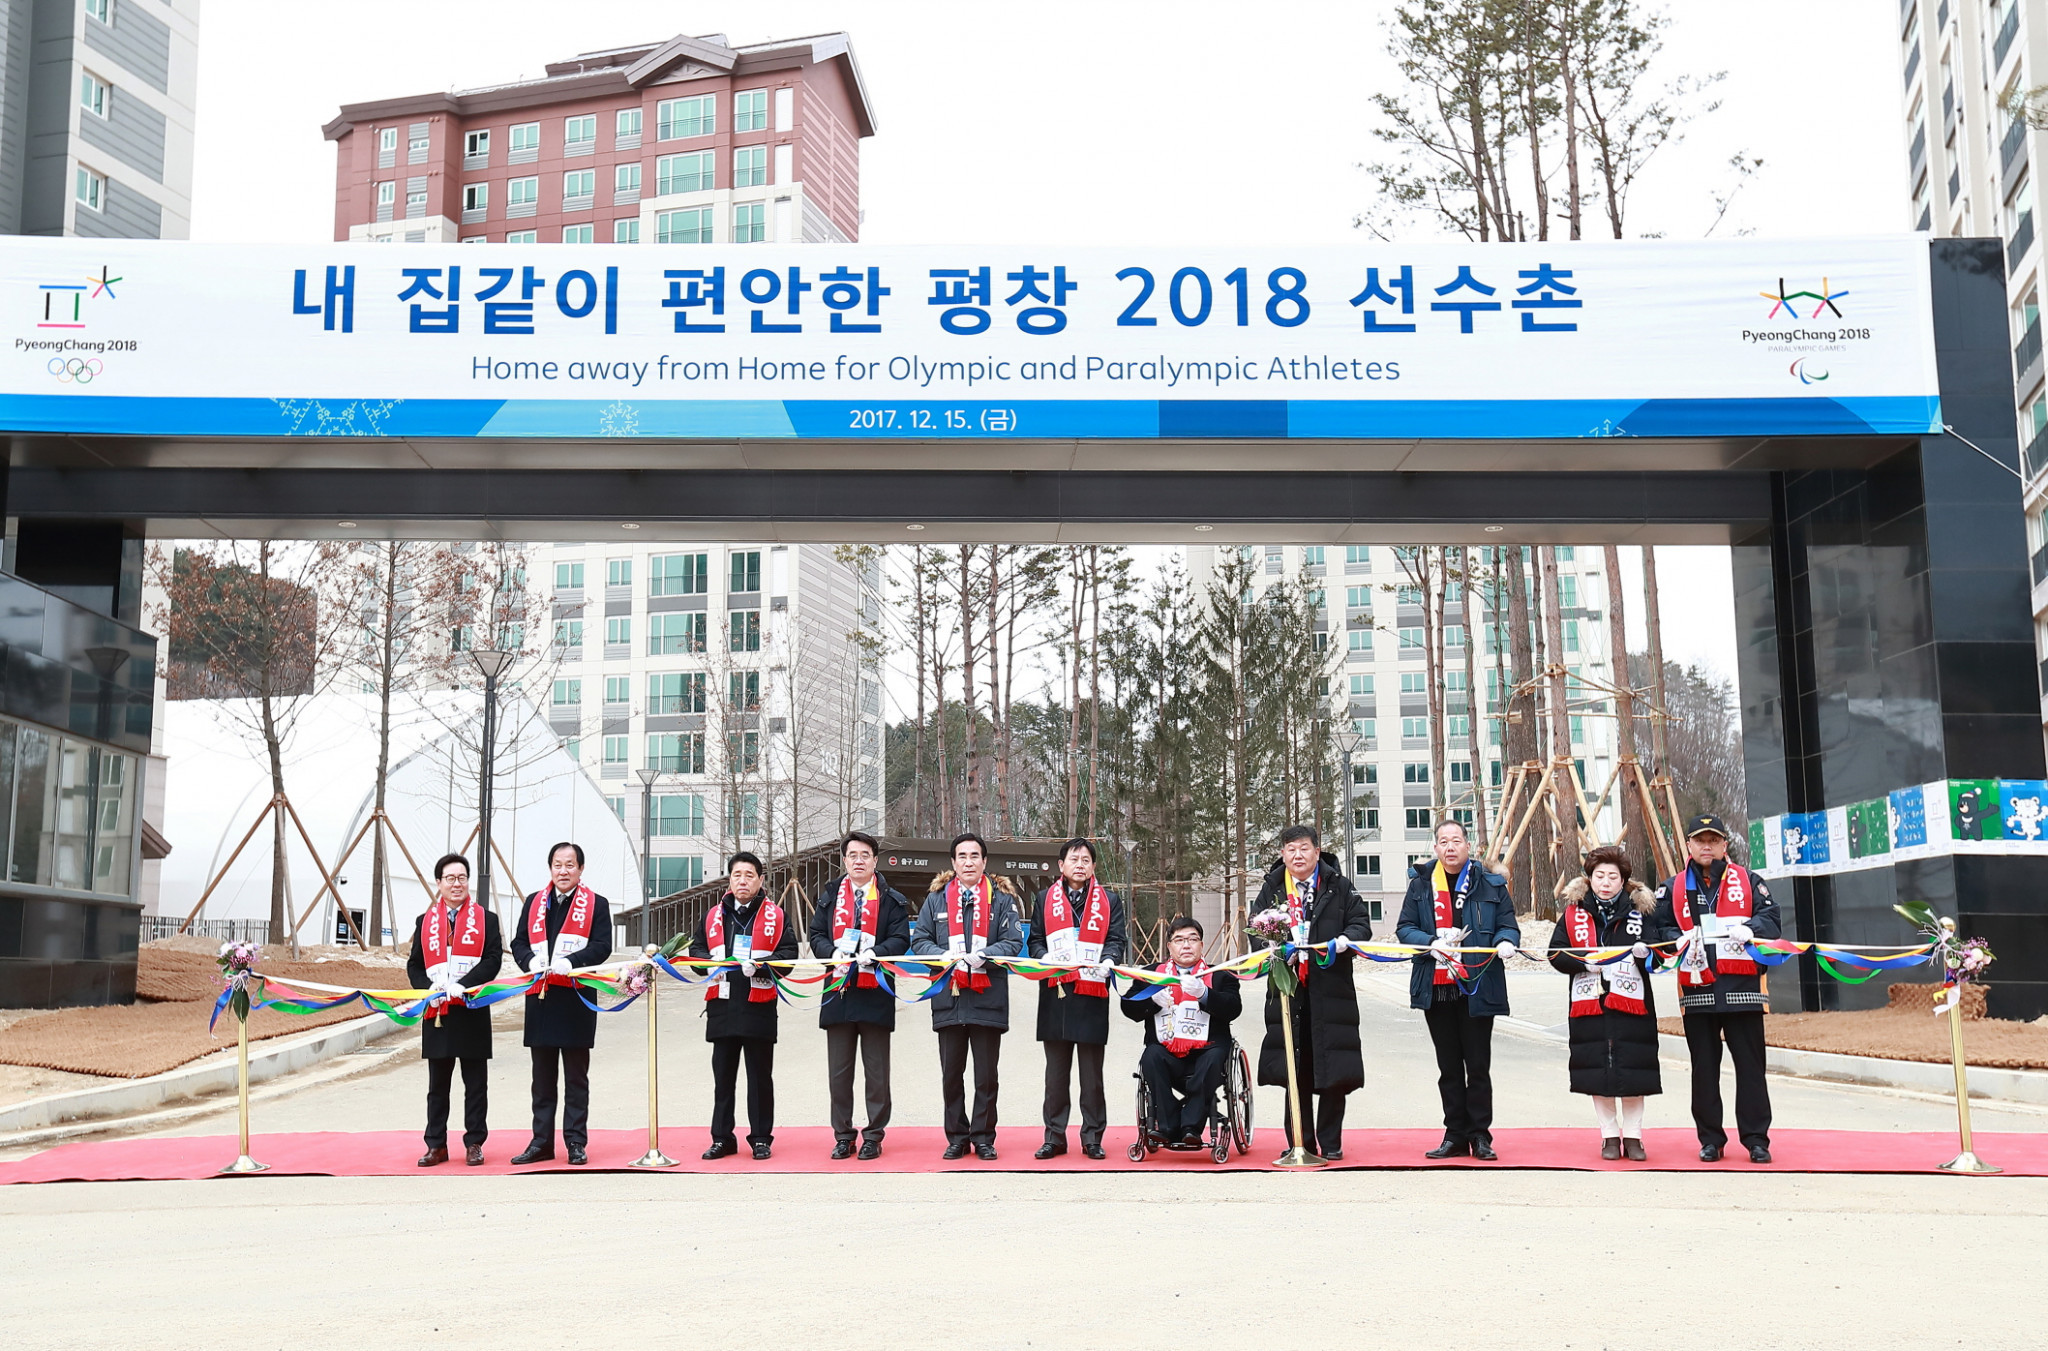 Ceremony held to mark completion of Pyeongchang 2018 Athletes' Villages